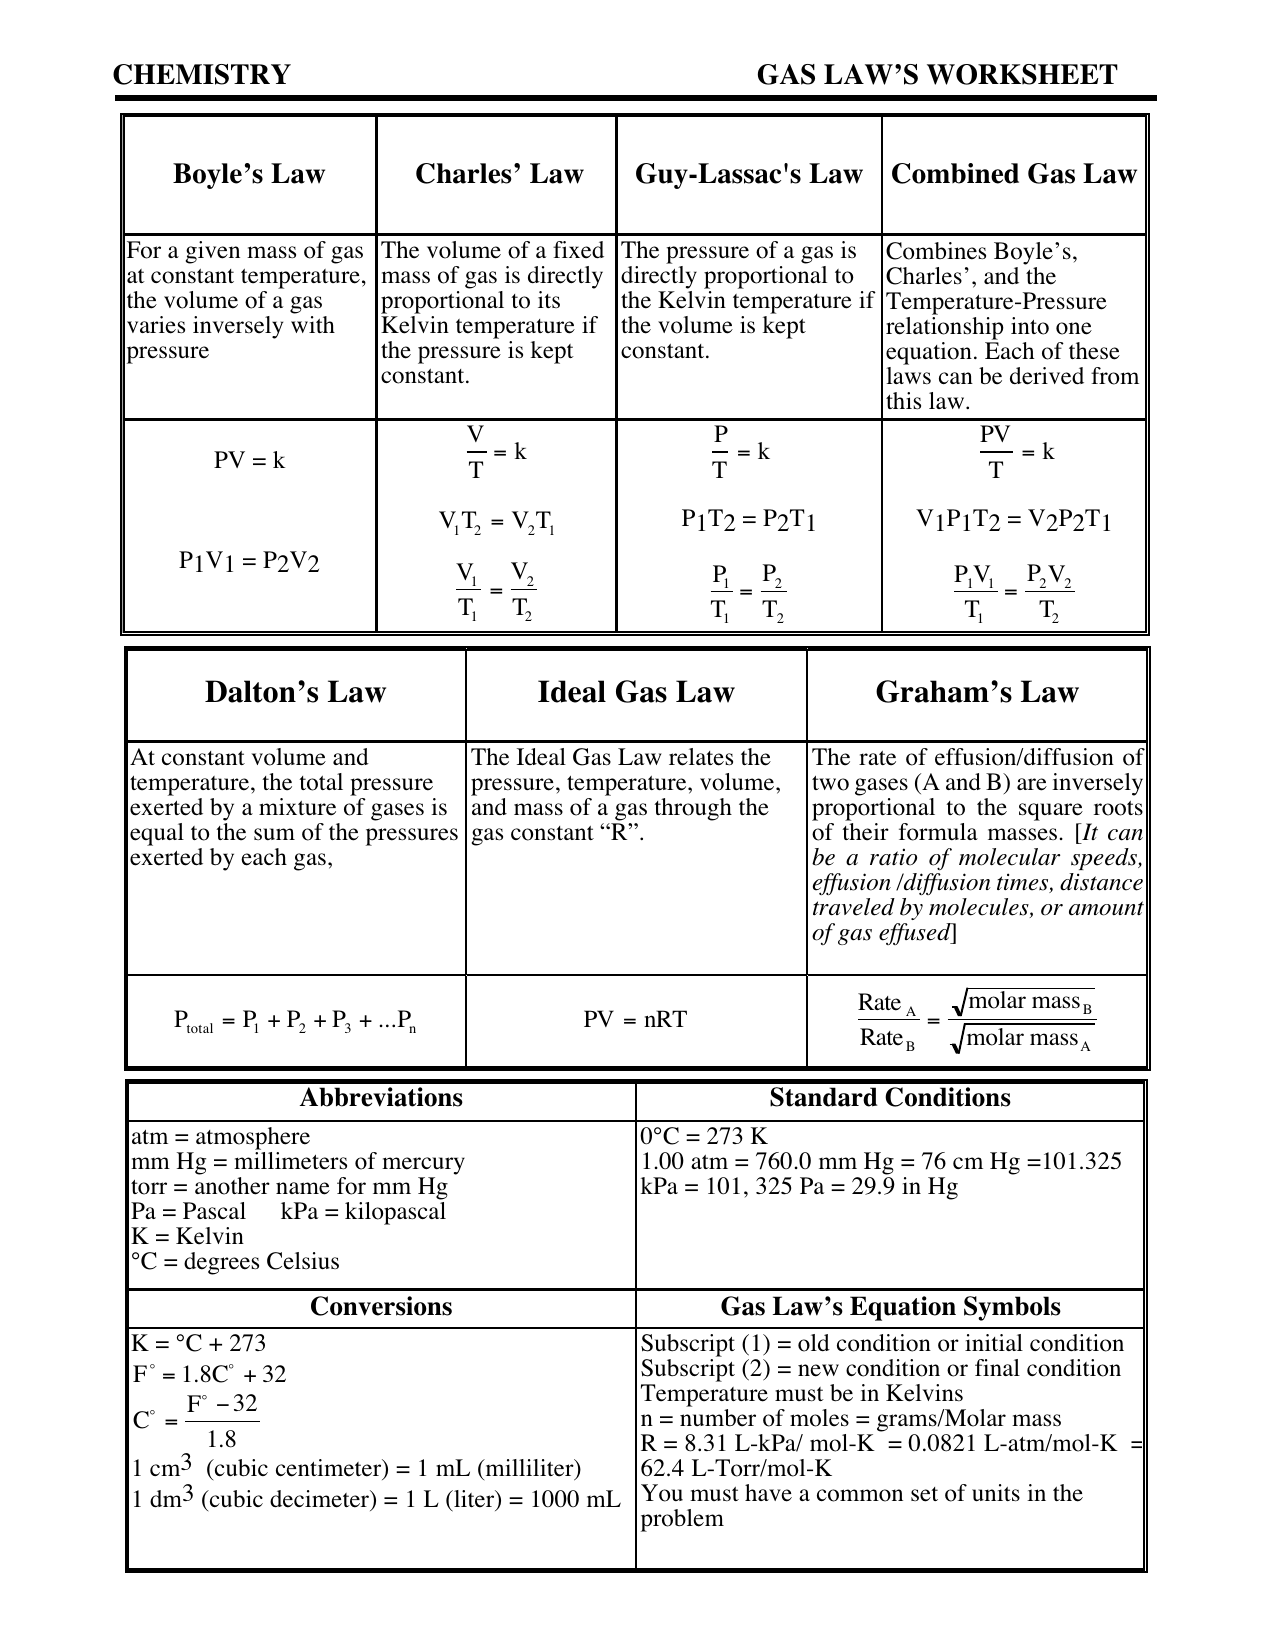 Gas Laws WS